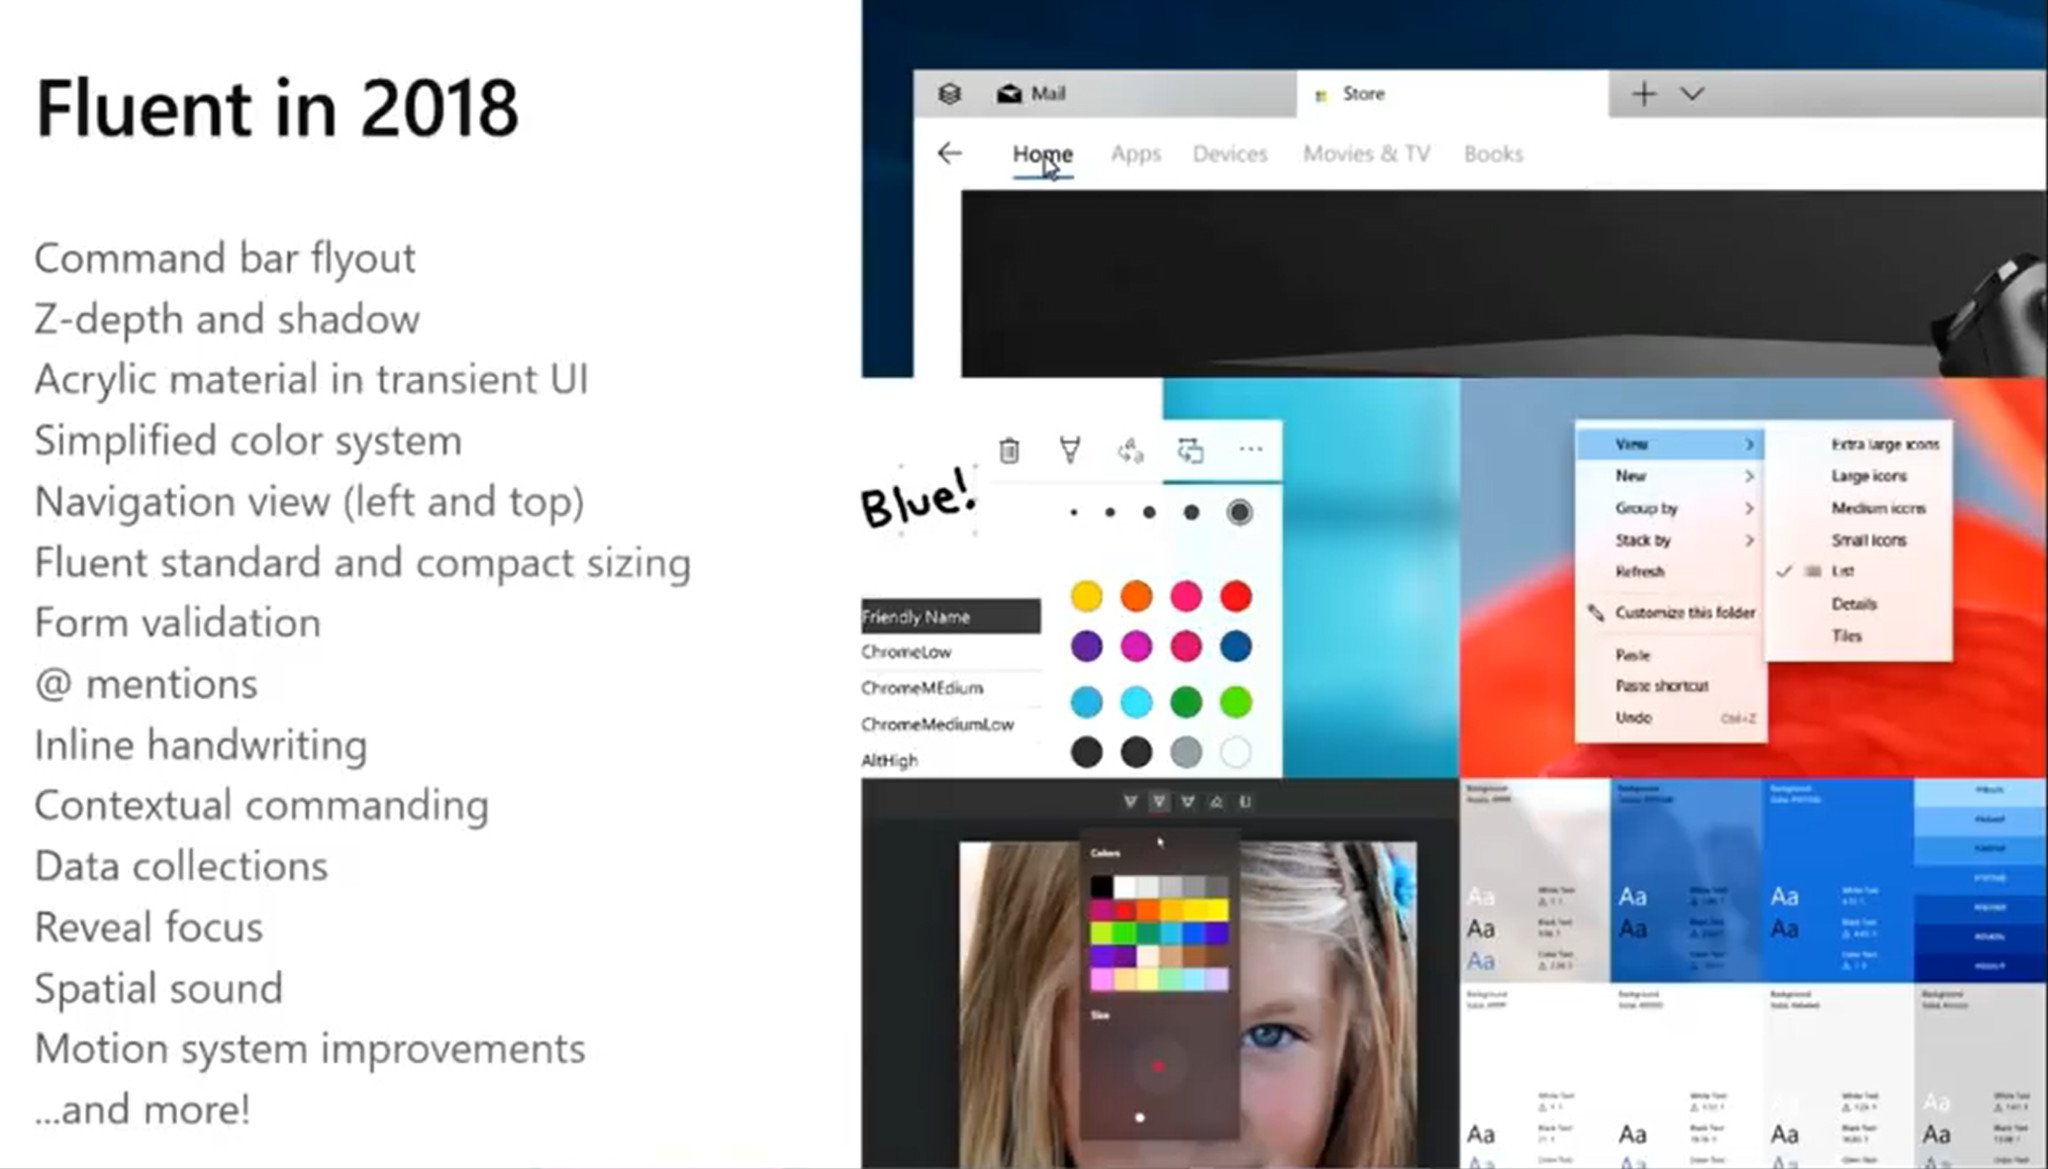 Microsoft Details New Improvements Coming To Its Fluent Design System On Windows 10 Windows 4522